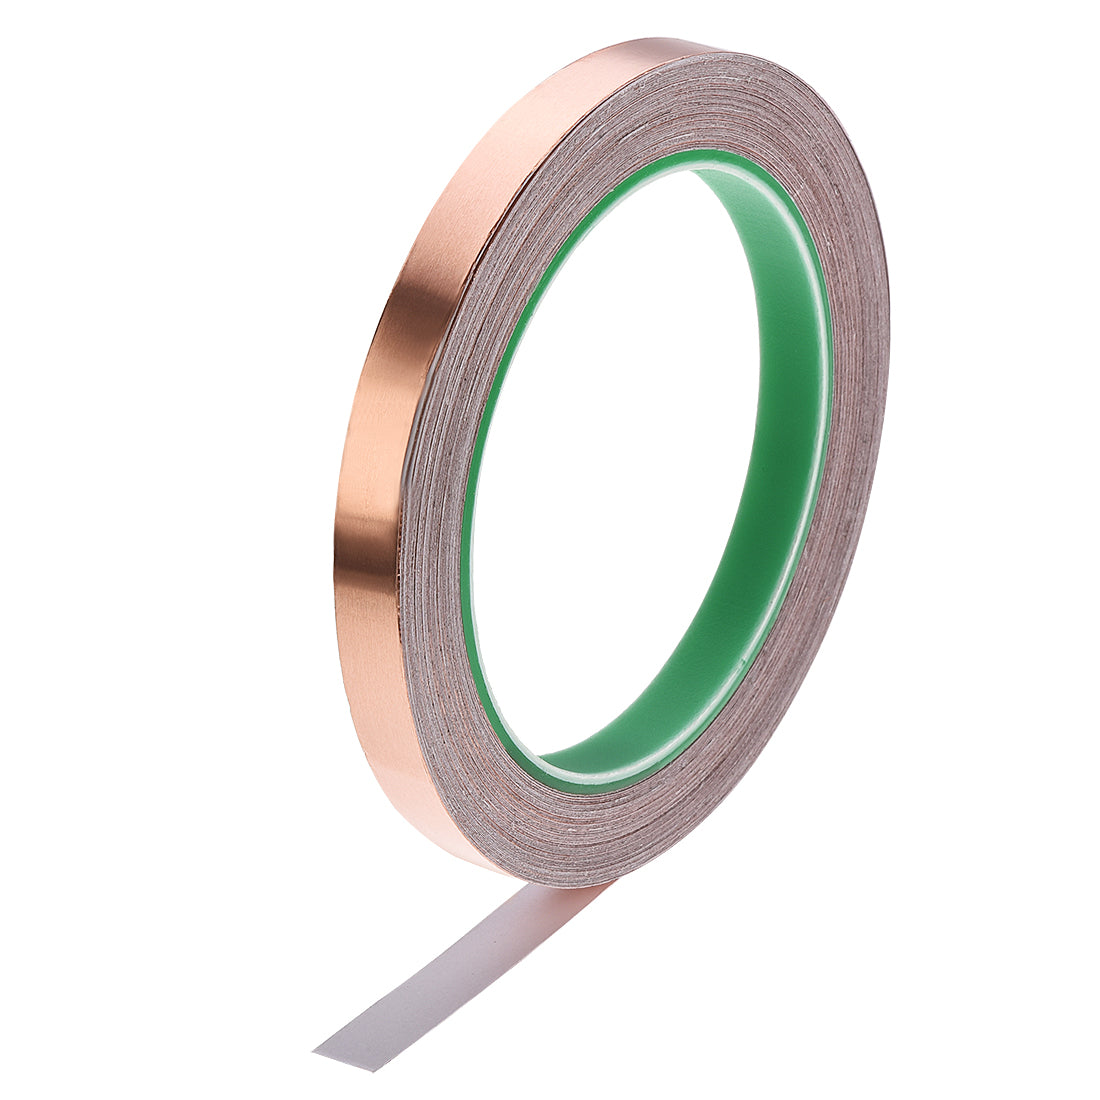 uxcell Uxcell Double Sided Conductive Tape Copper Foil Tape 10mm x 20m for EMI Shielding